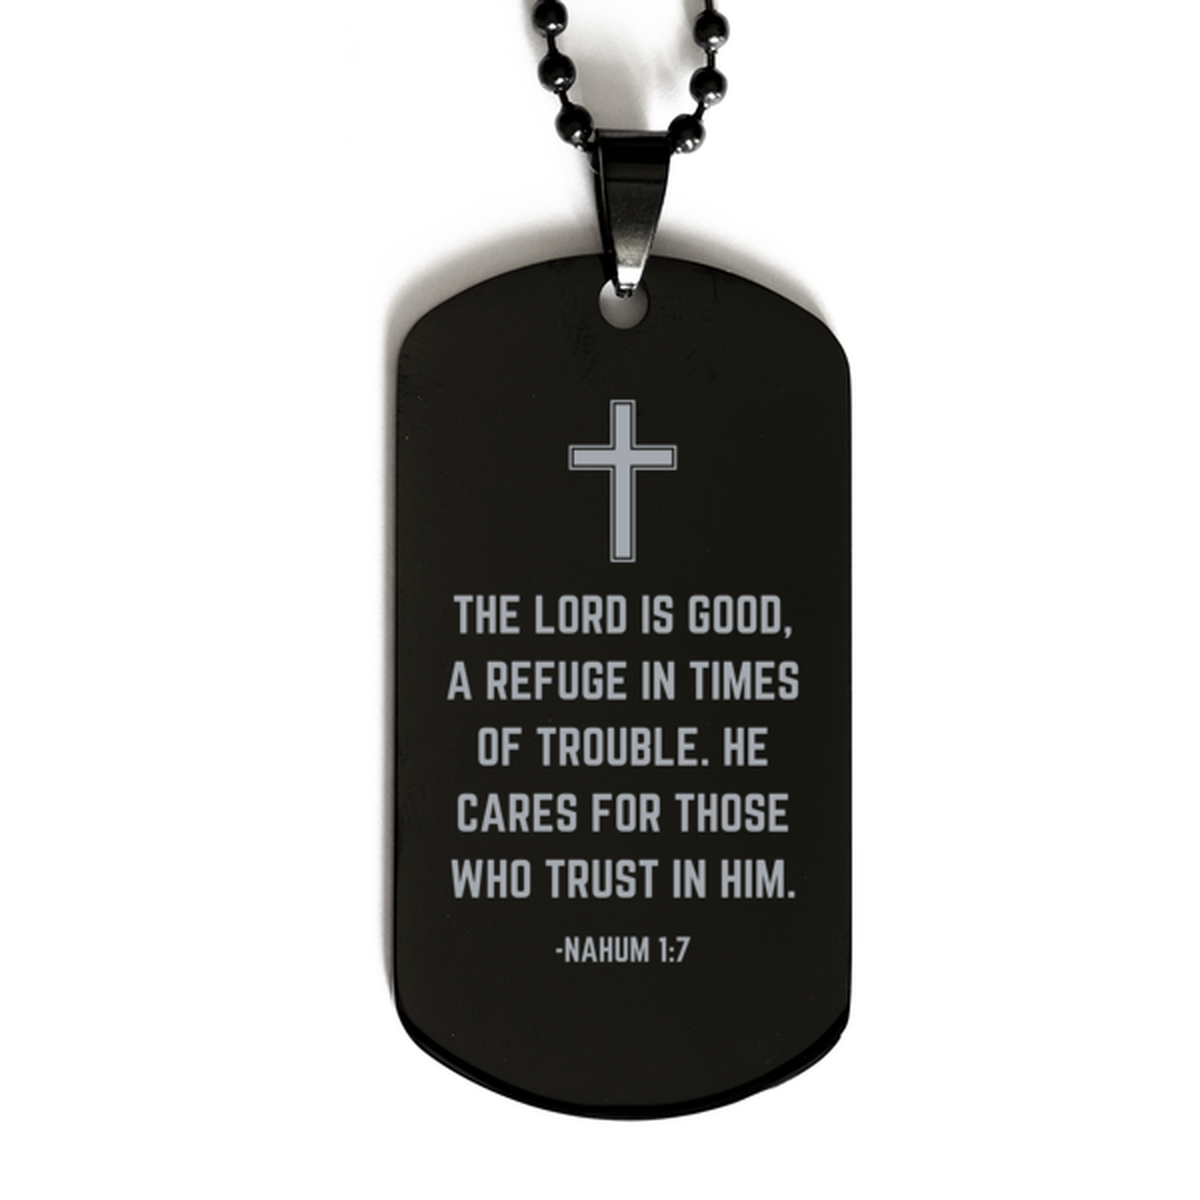 Baptism Gifts For Teenage Boys Girls, Christian Bible Verse Black Dog Tag, The Lord is good, Confirmation Gifts, Bible Verse Necklace for Son, Godson, Grandson, Nephew